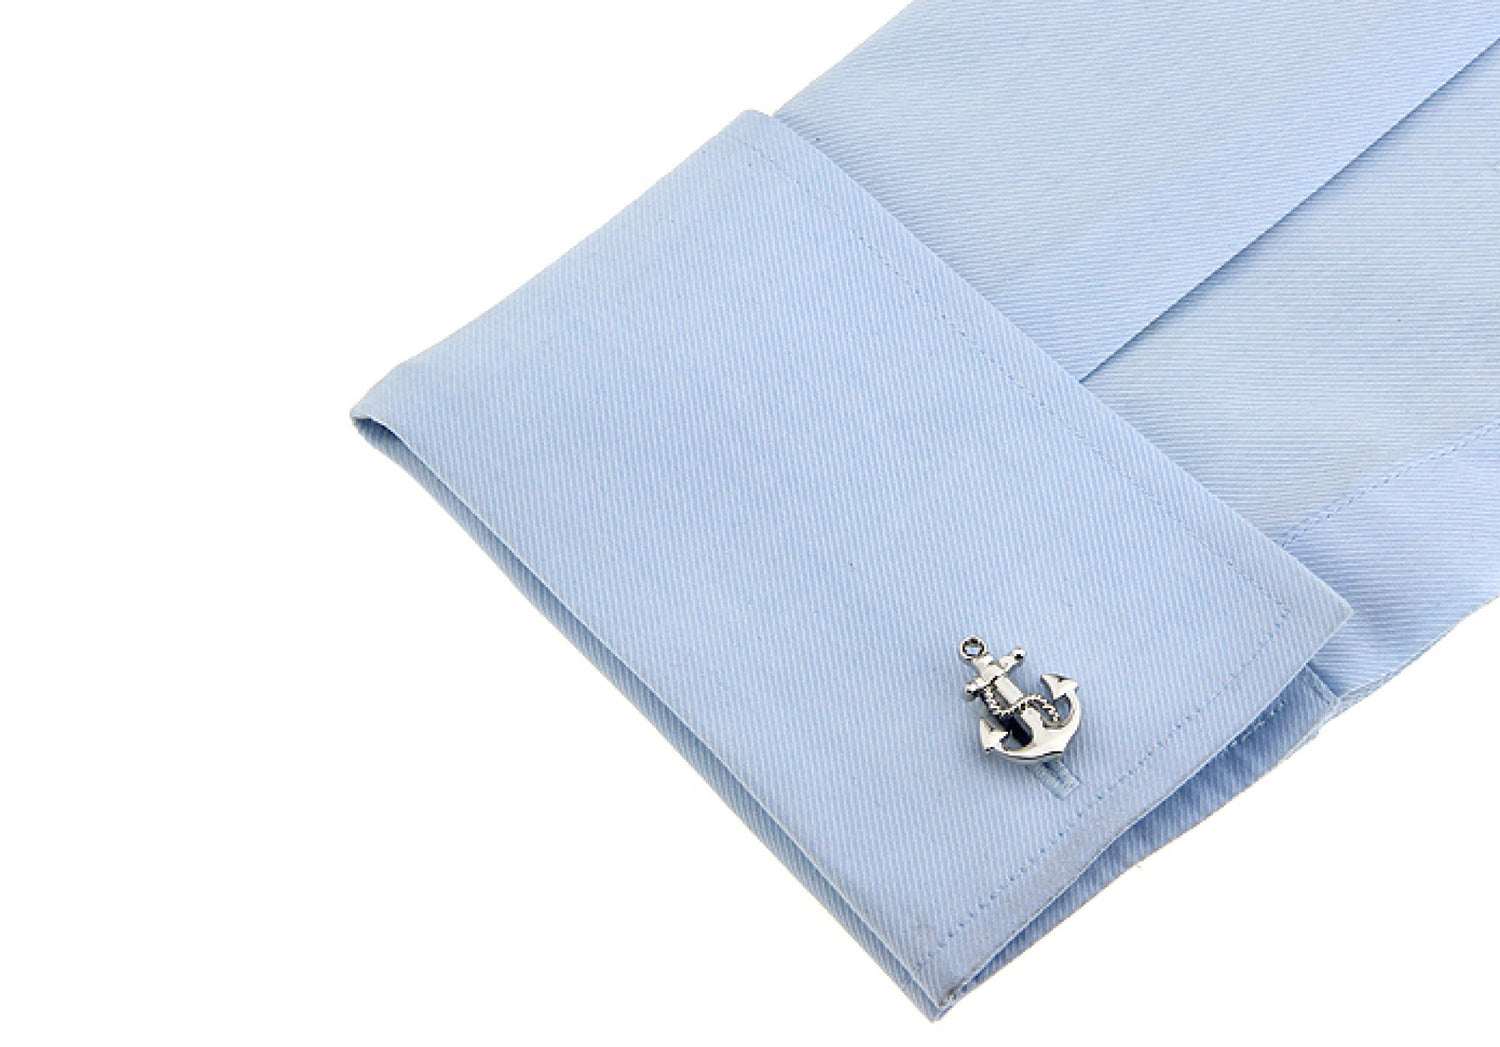 On Sleeve: A chrome colored boat anchor shaped cuff-link